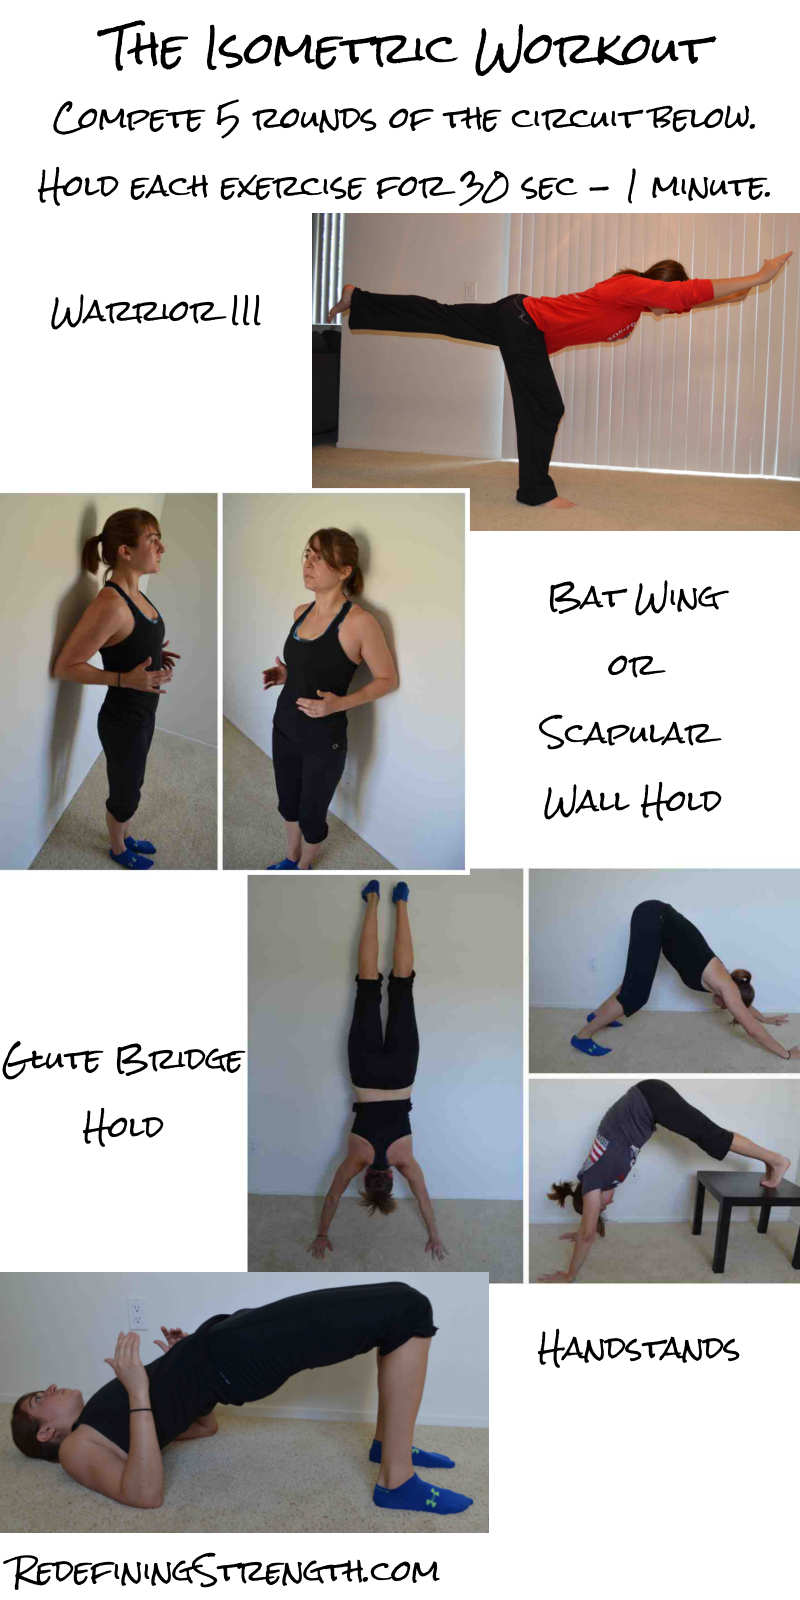 20 Minute Full Body Isometric Workout